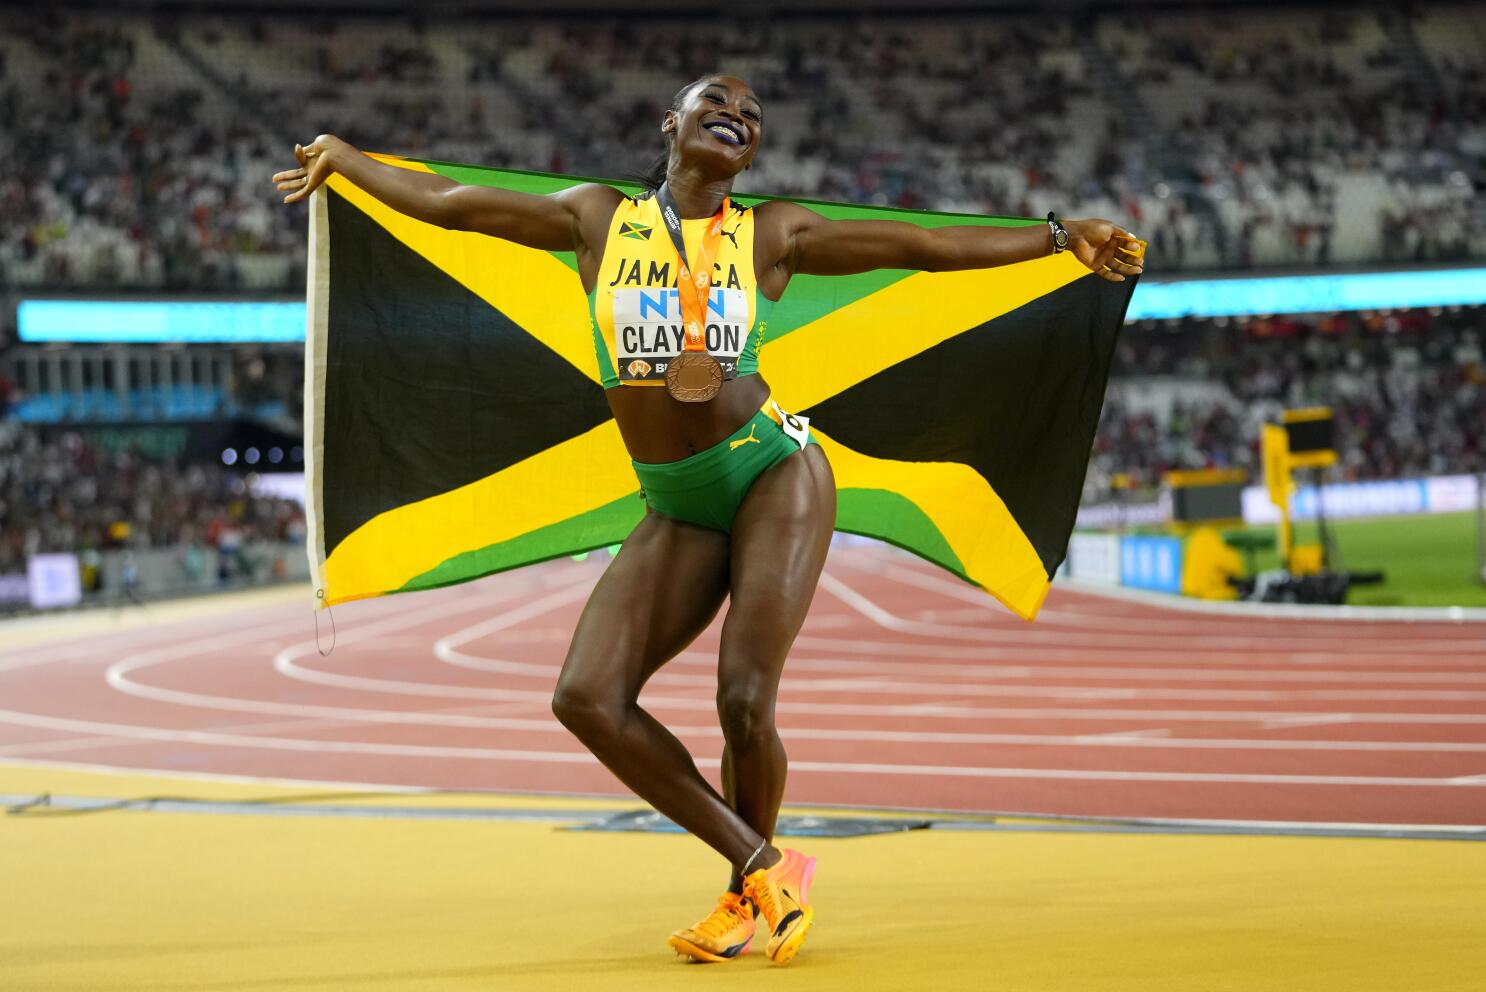 Anything is possible': Jamaican athlete touches hearts at Special Olympics  World Games